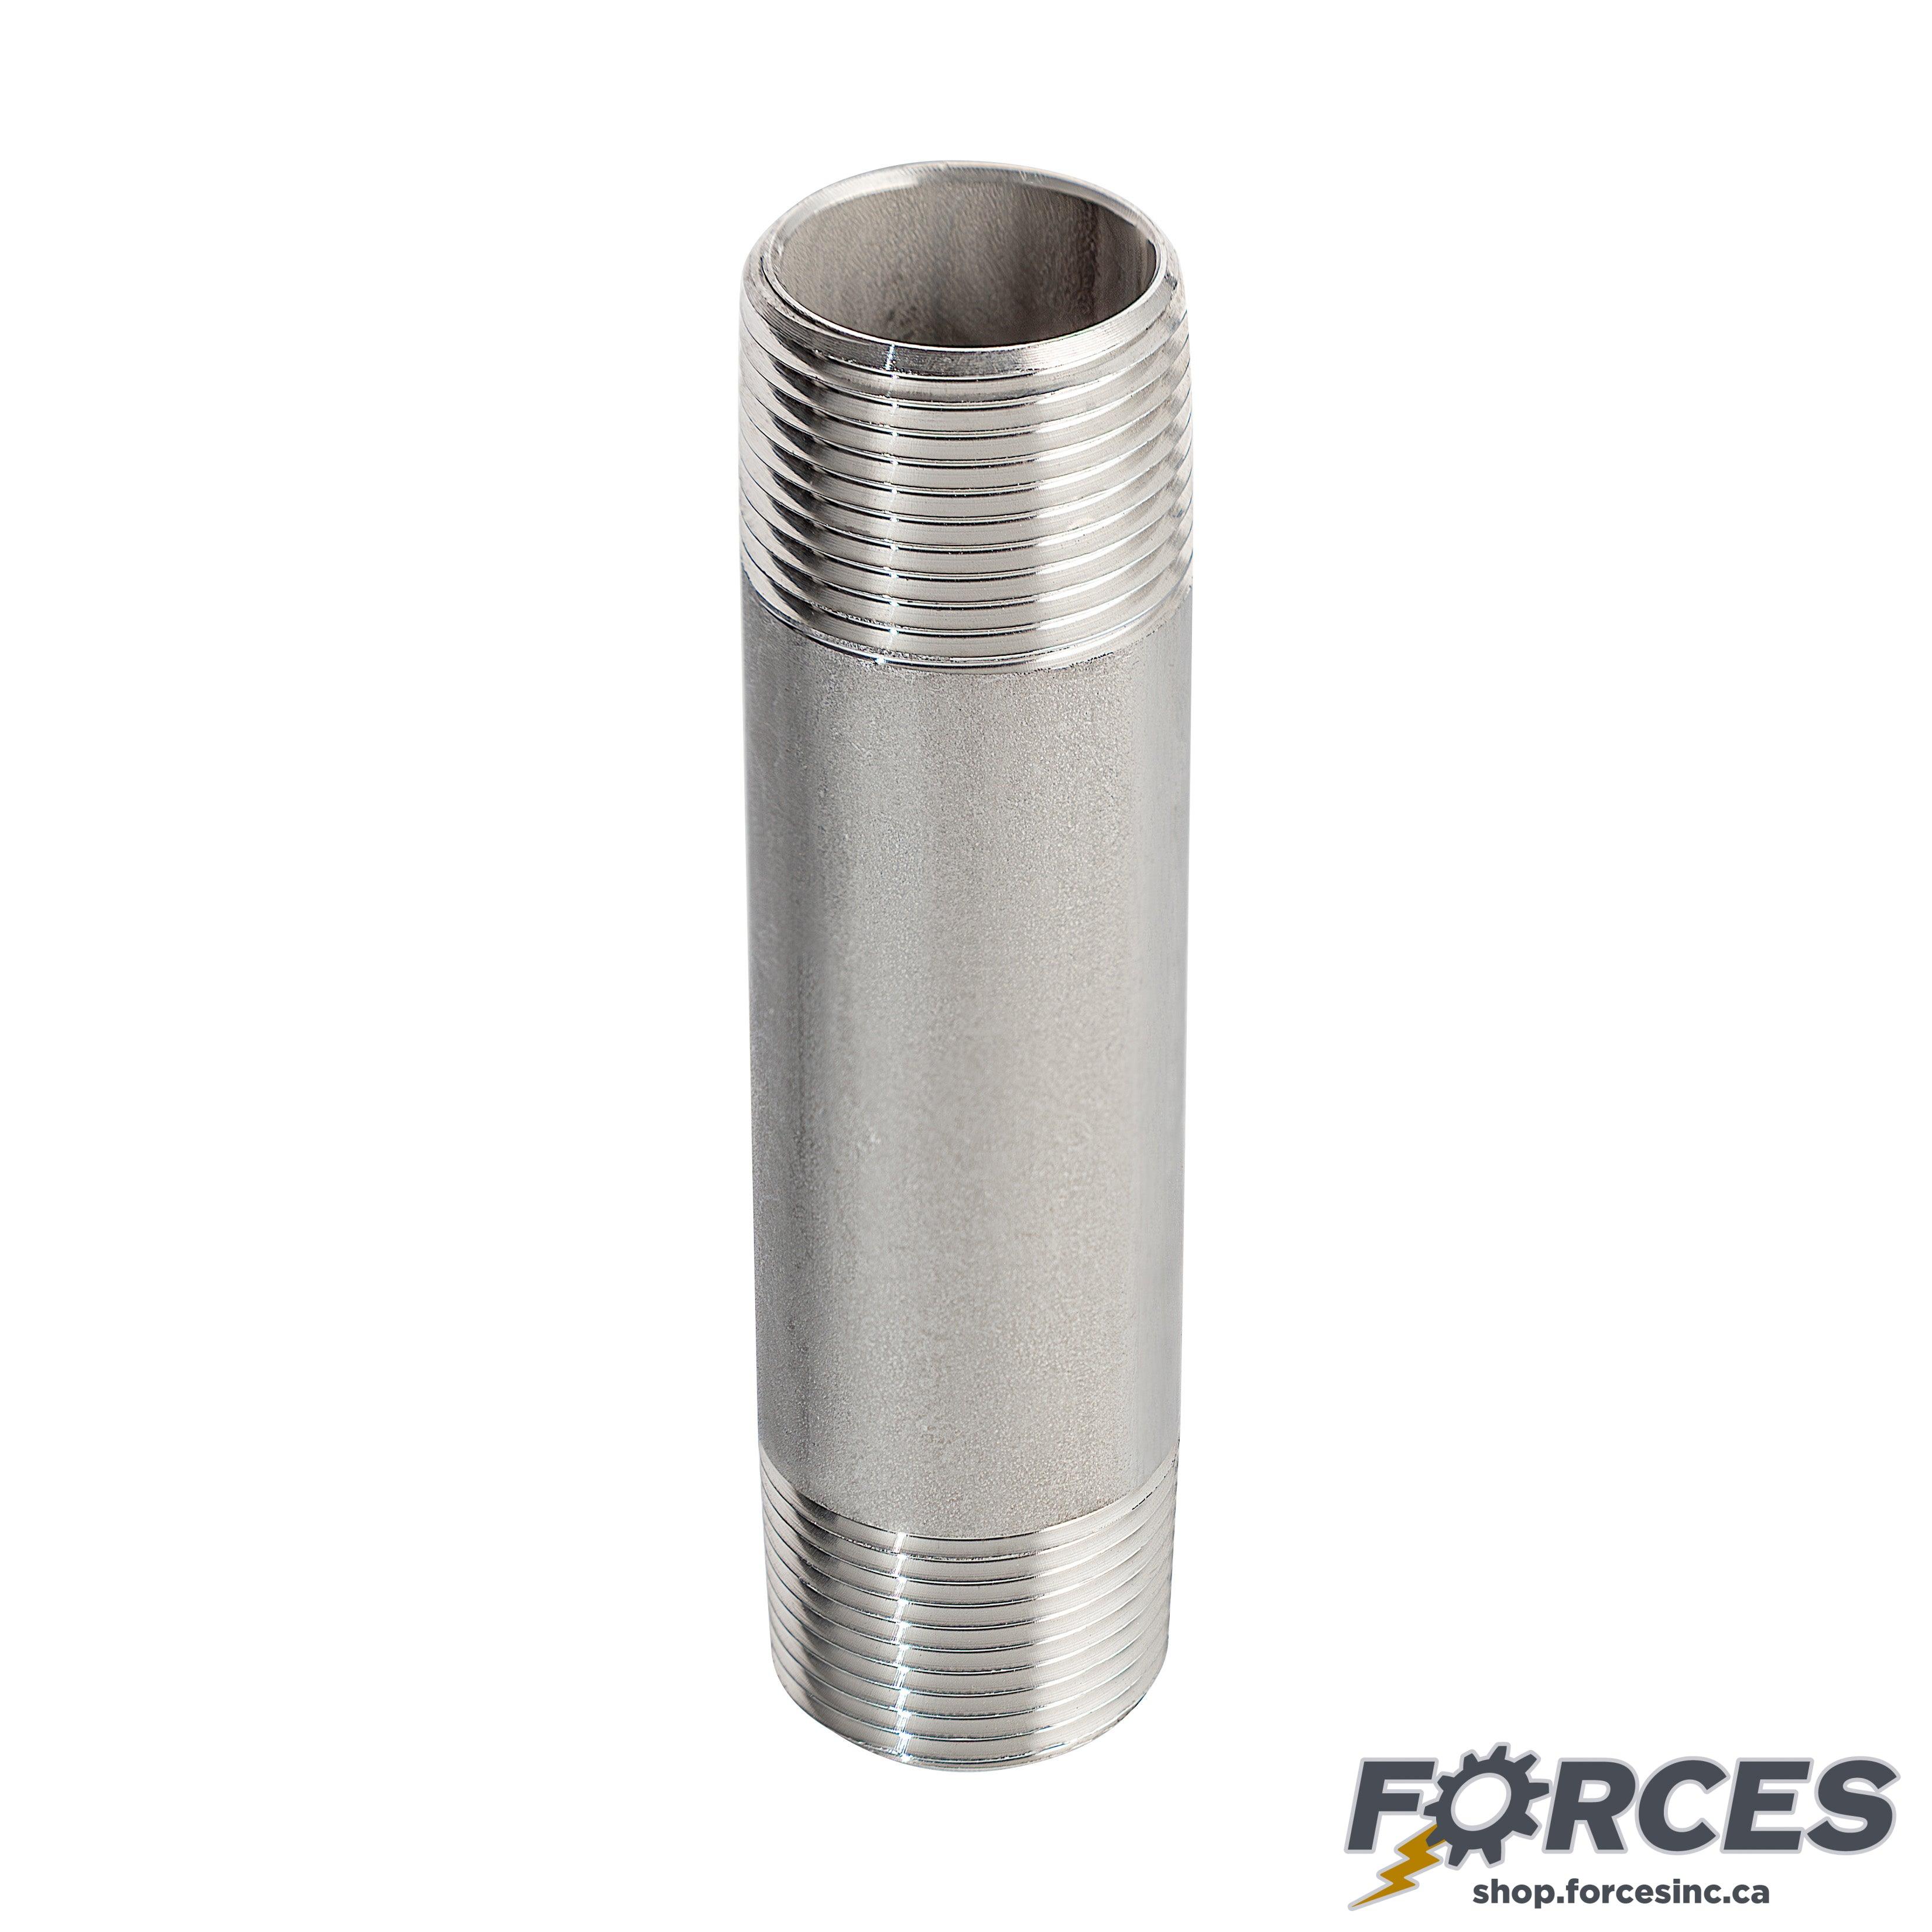 2-1/2" X 6" Long Nipple - Stainless Steel 316 - Forces Inc